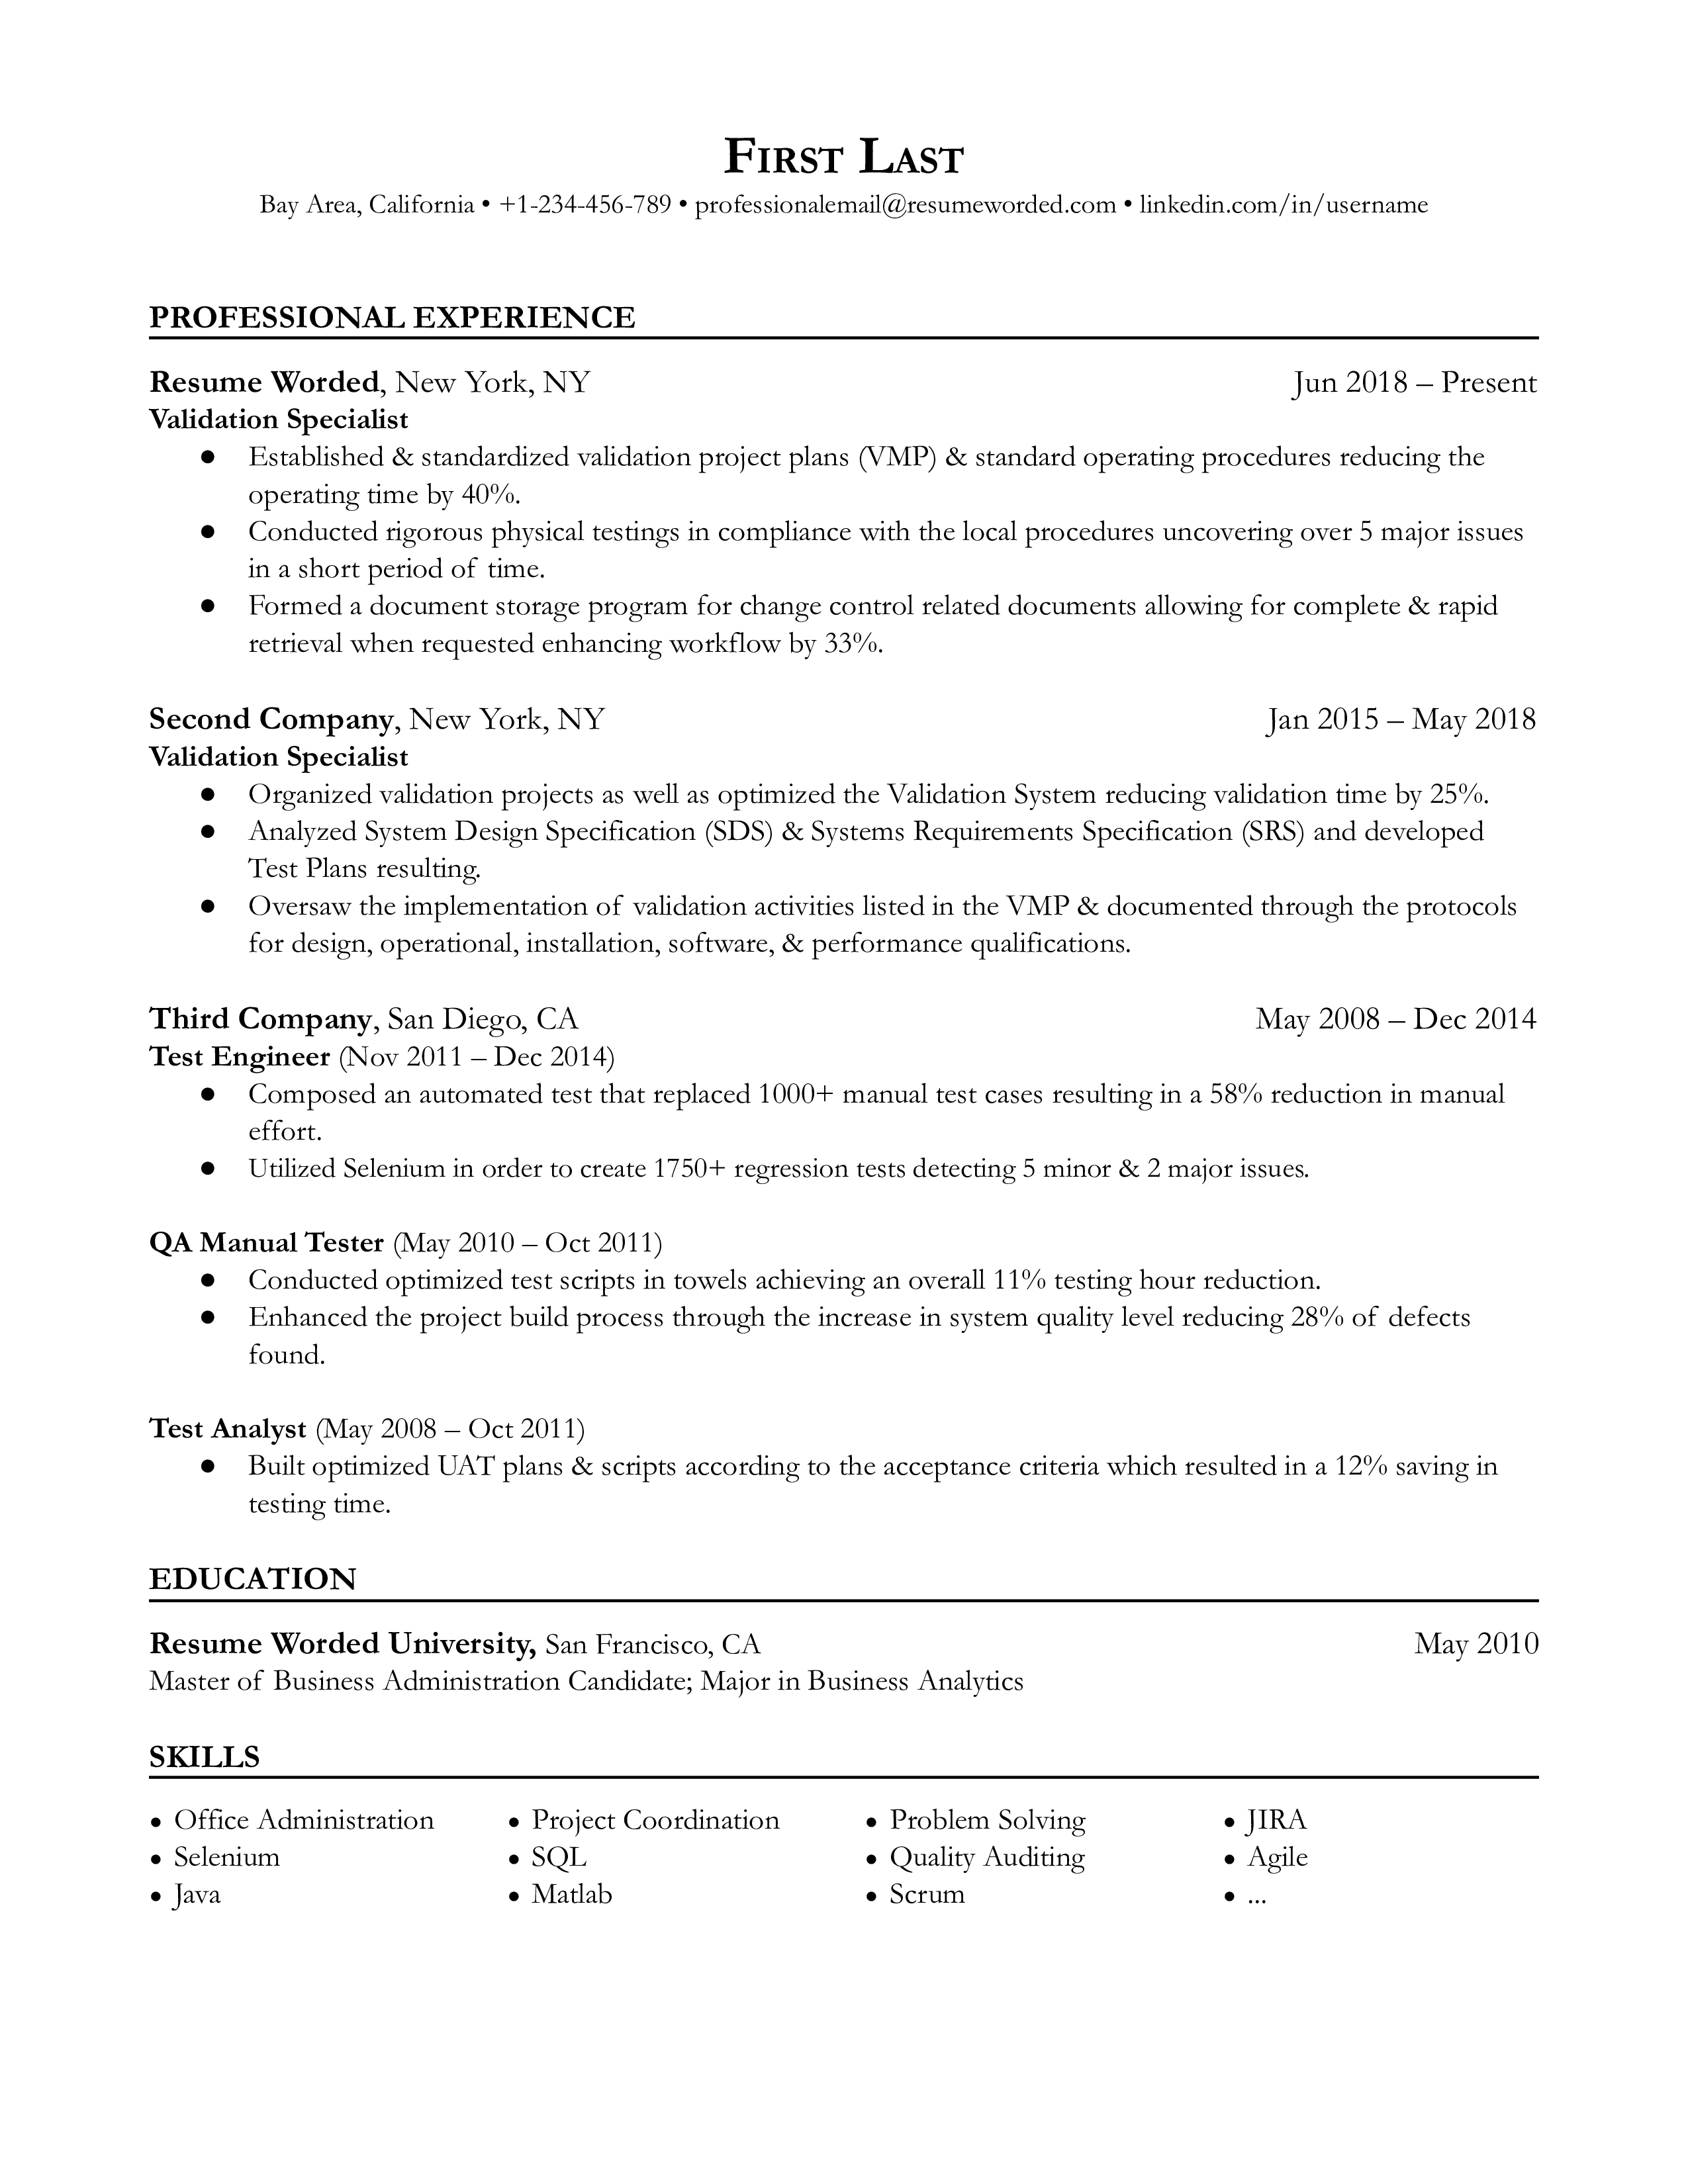 Professional CV of a Validation Specialist detailing skills, experiences, and technical competency.